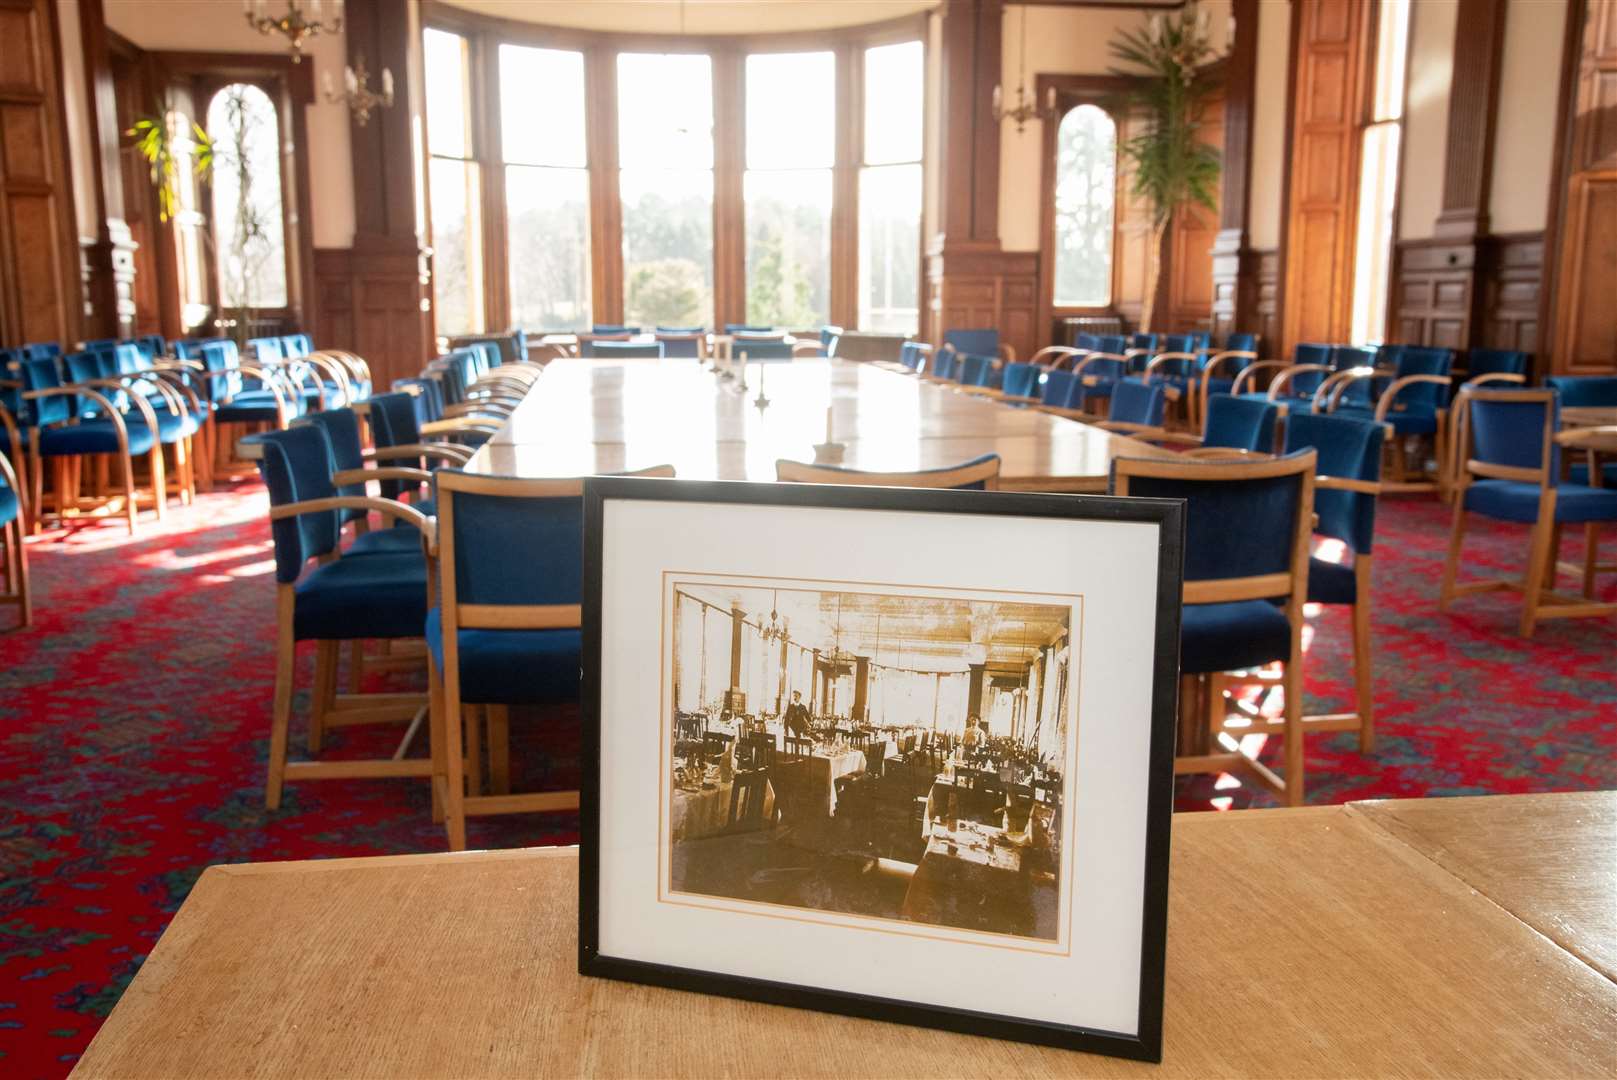 The spacious dining room and a Victorian-era picture of how it was when the building was a hydropathic hotel.